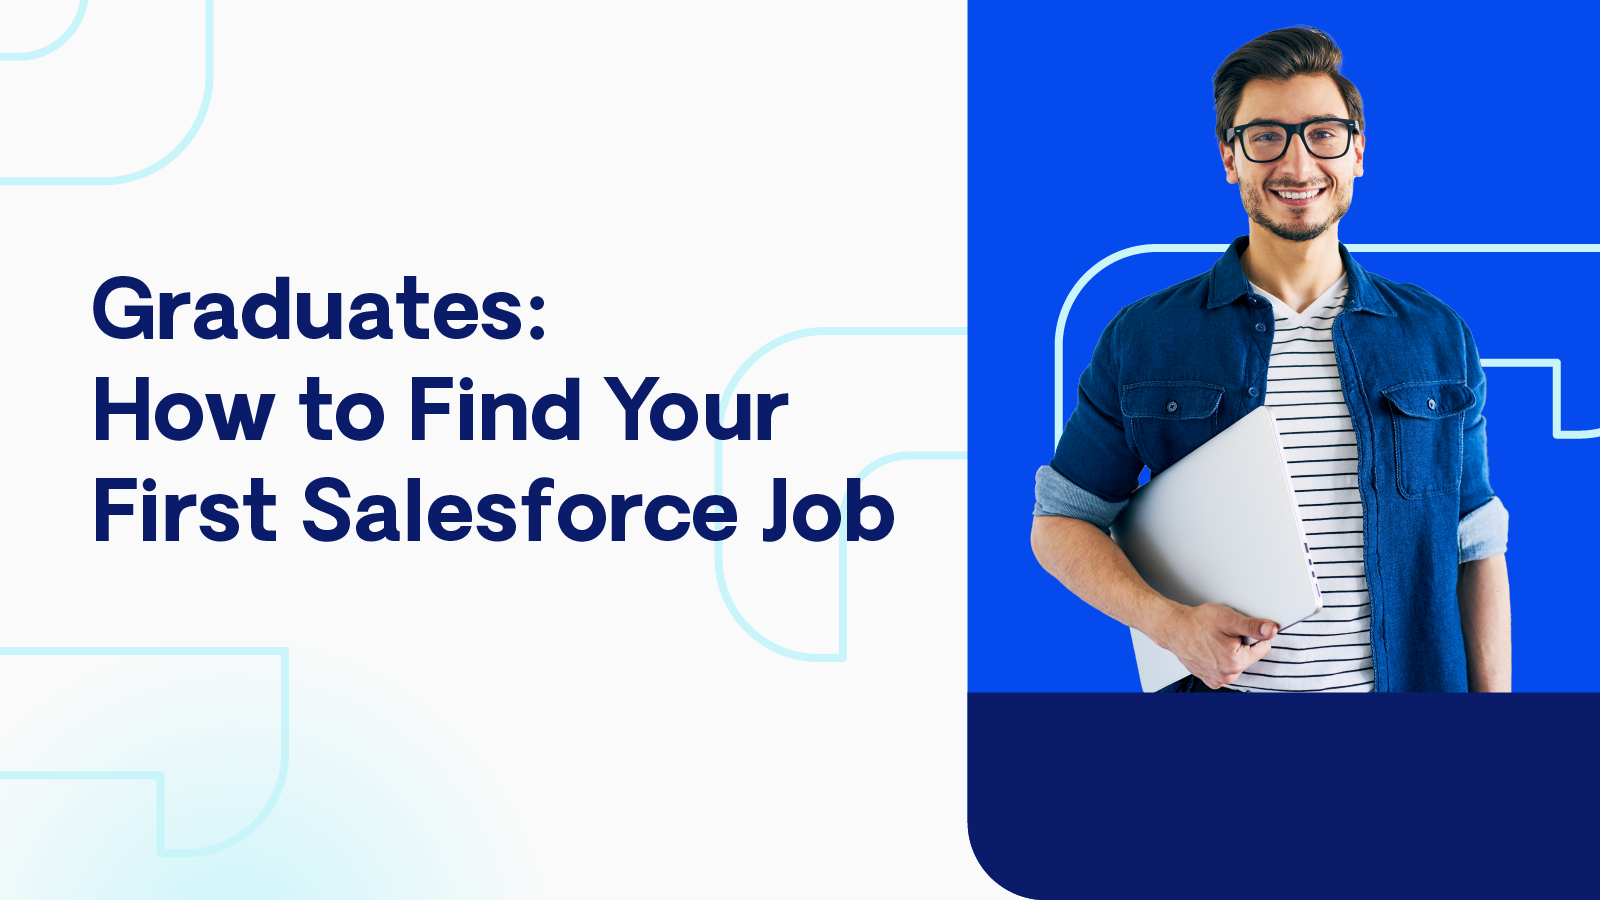 Graduates: How to Find Your First Salesforce Job